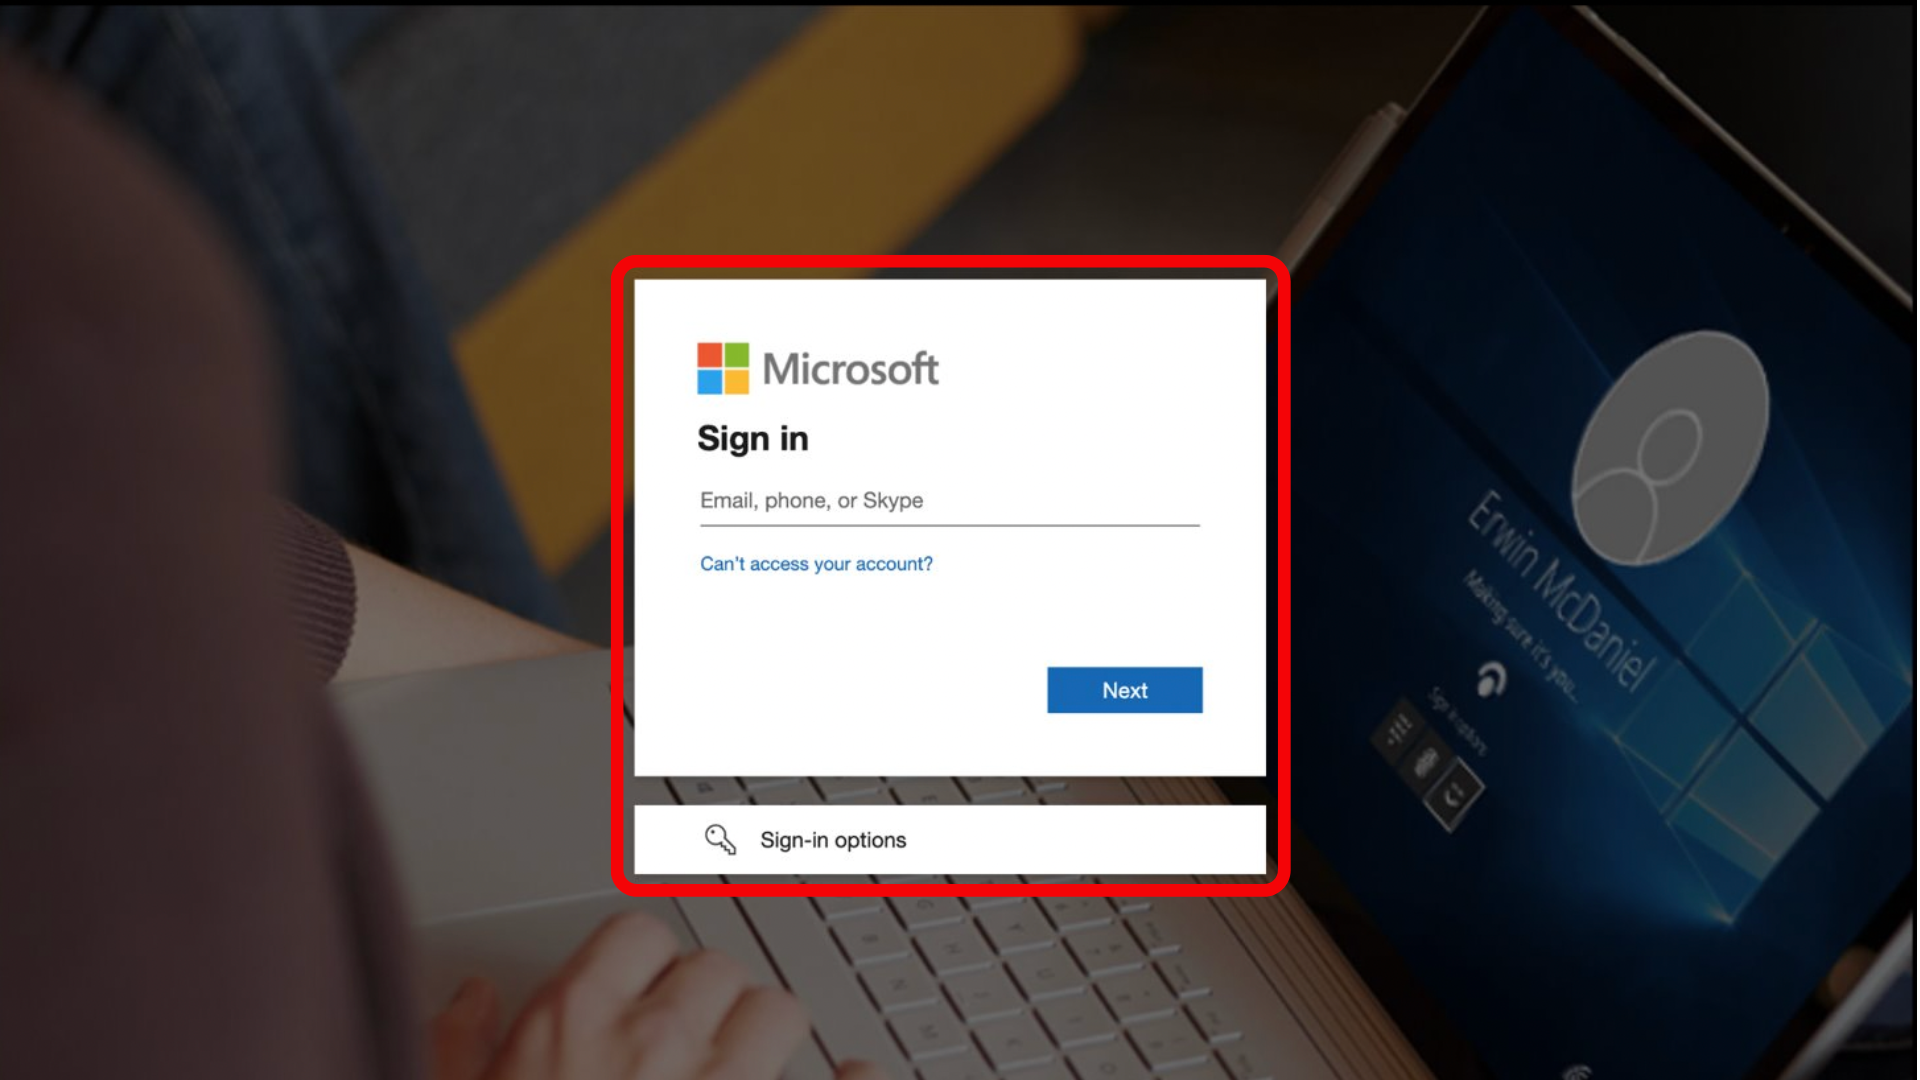 Sign in to your Microsoft account page